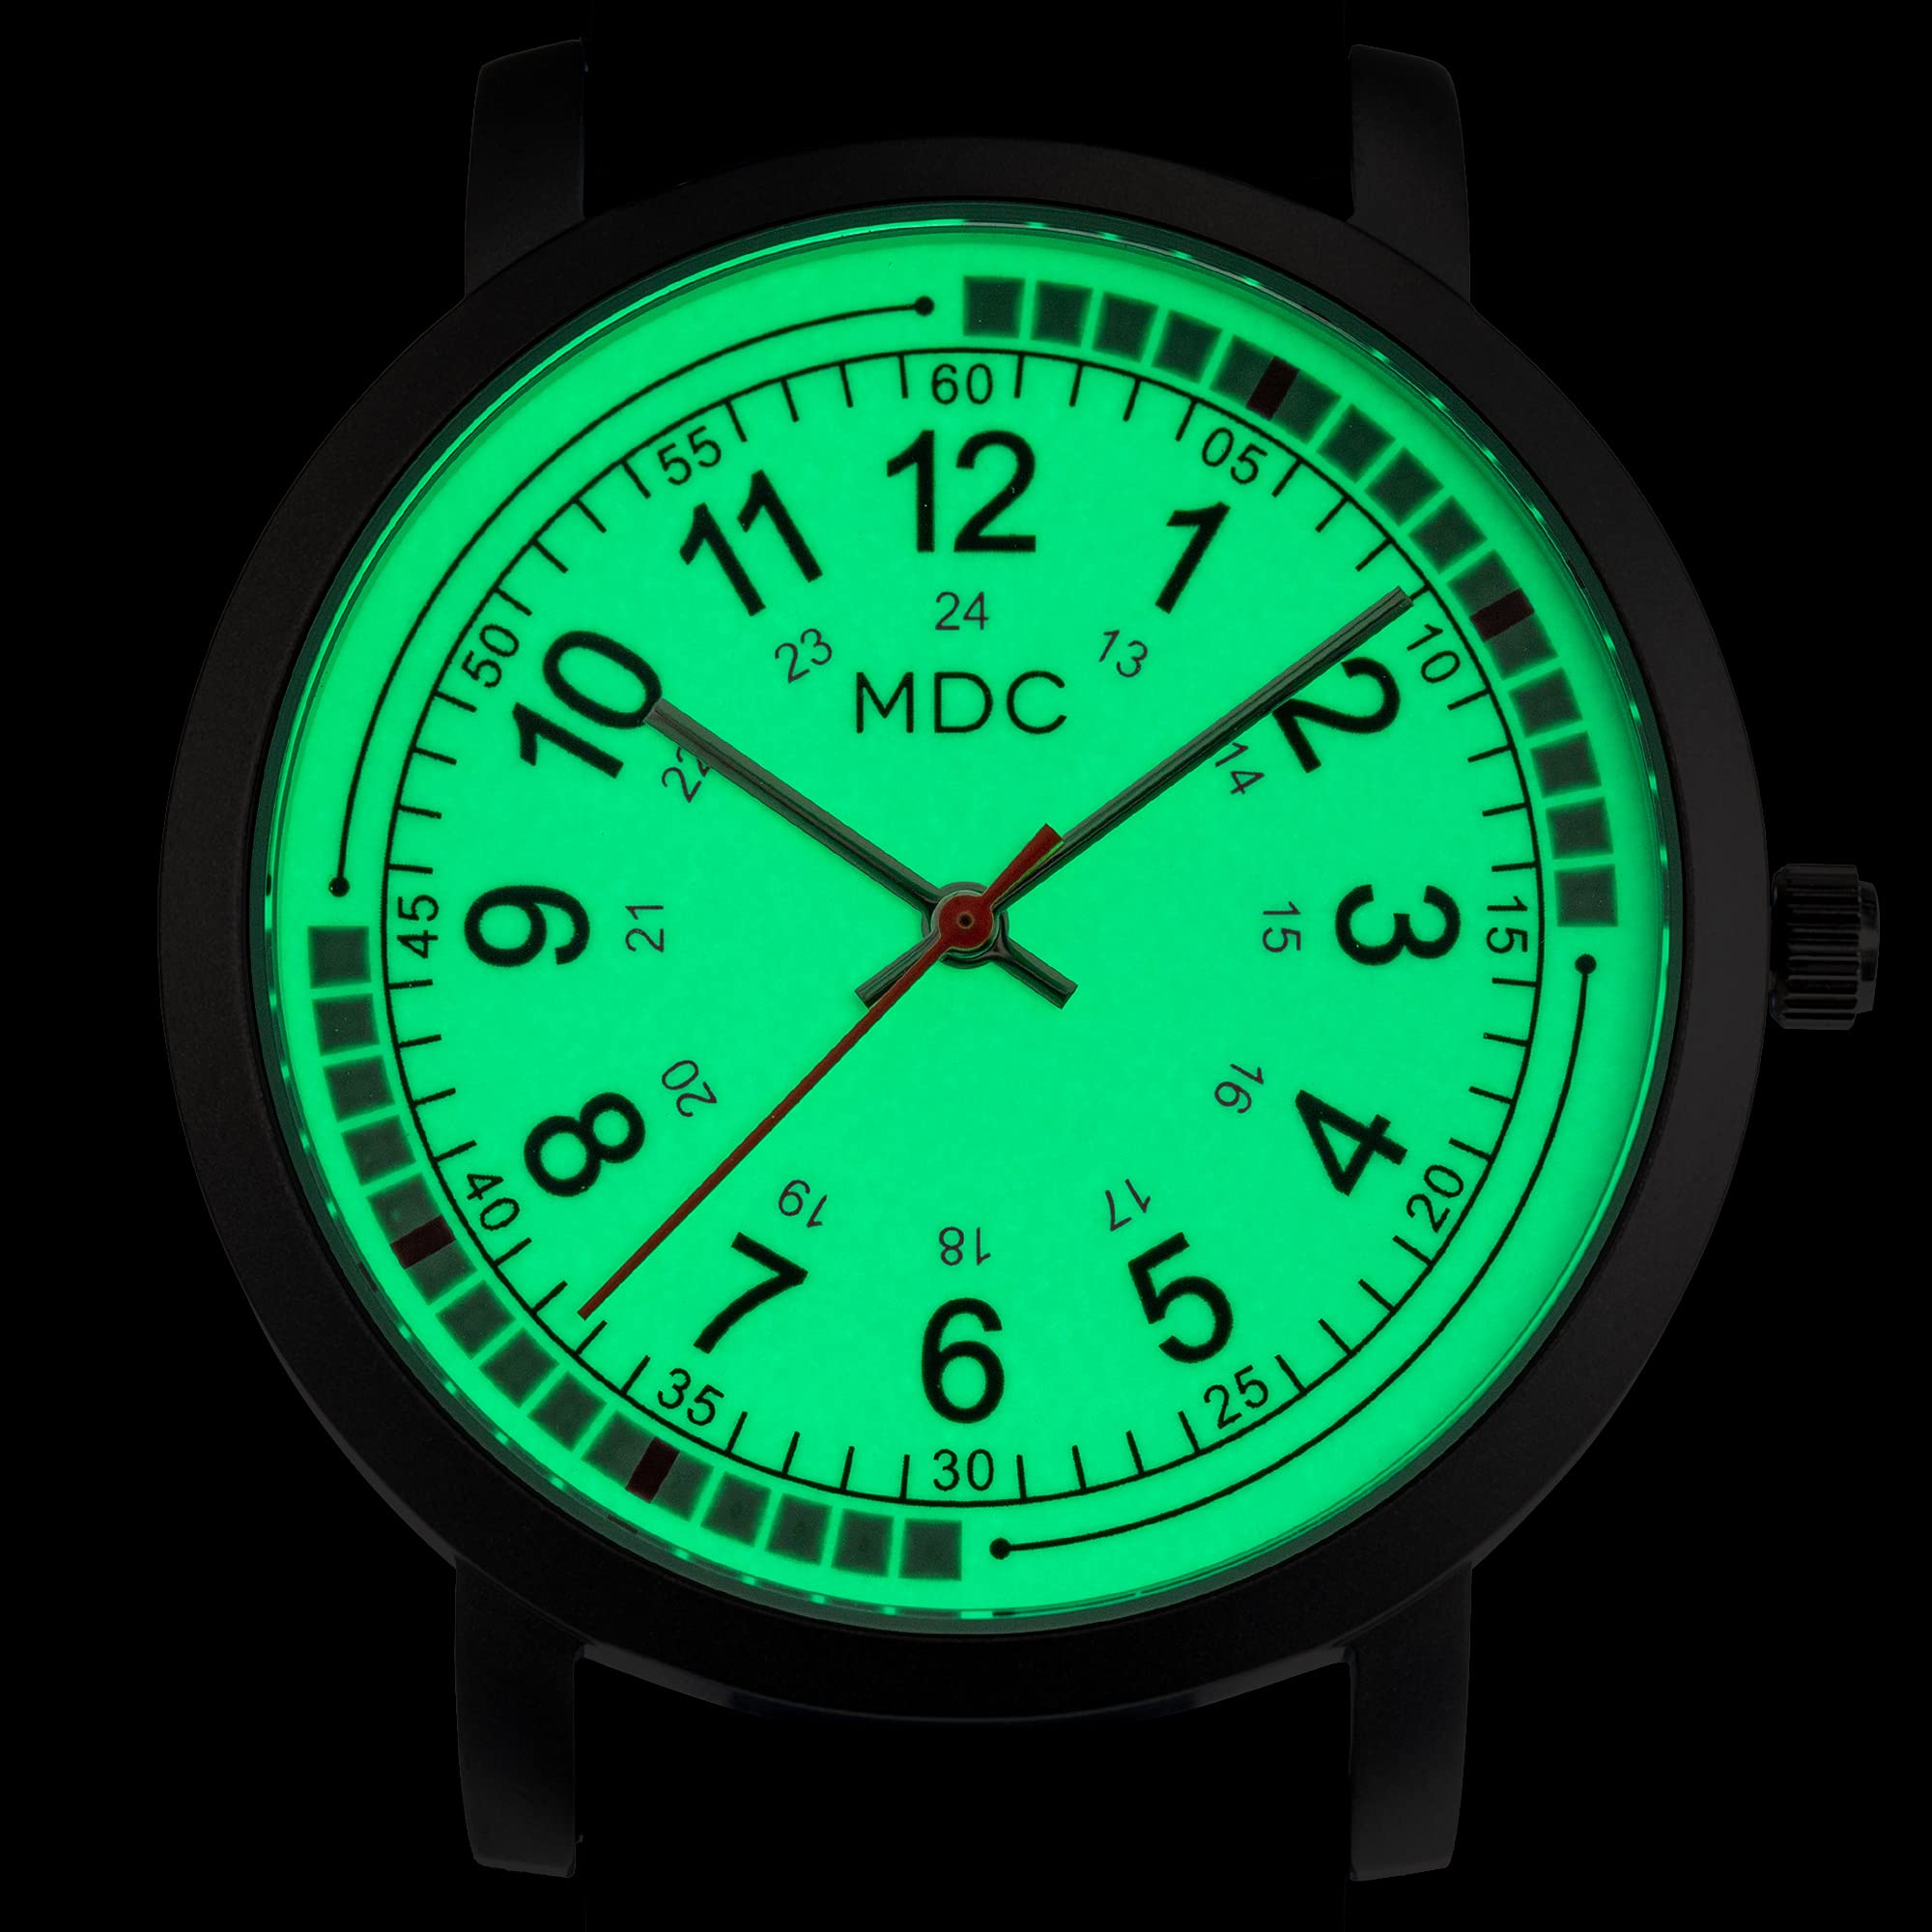 MDC Glow in The Dark Nurse Watches for Women, Nursing Watch with 15 Second Intervals Quadrant Pulse Ring, 5ATM Waterproof Analog Wristwatch, Silicone Band